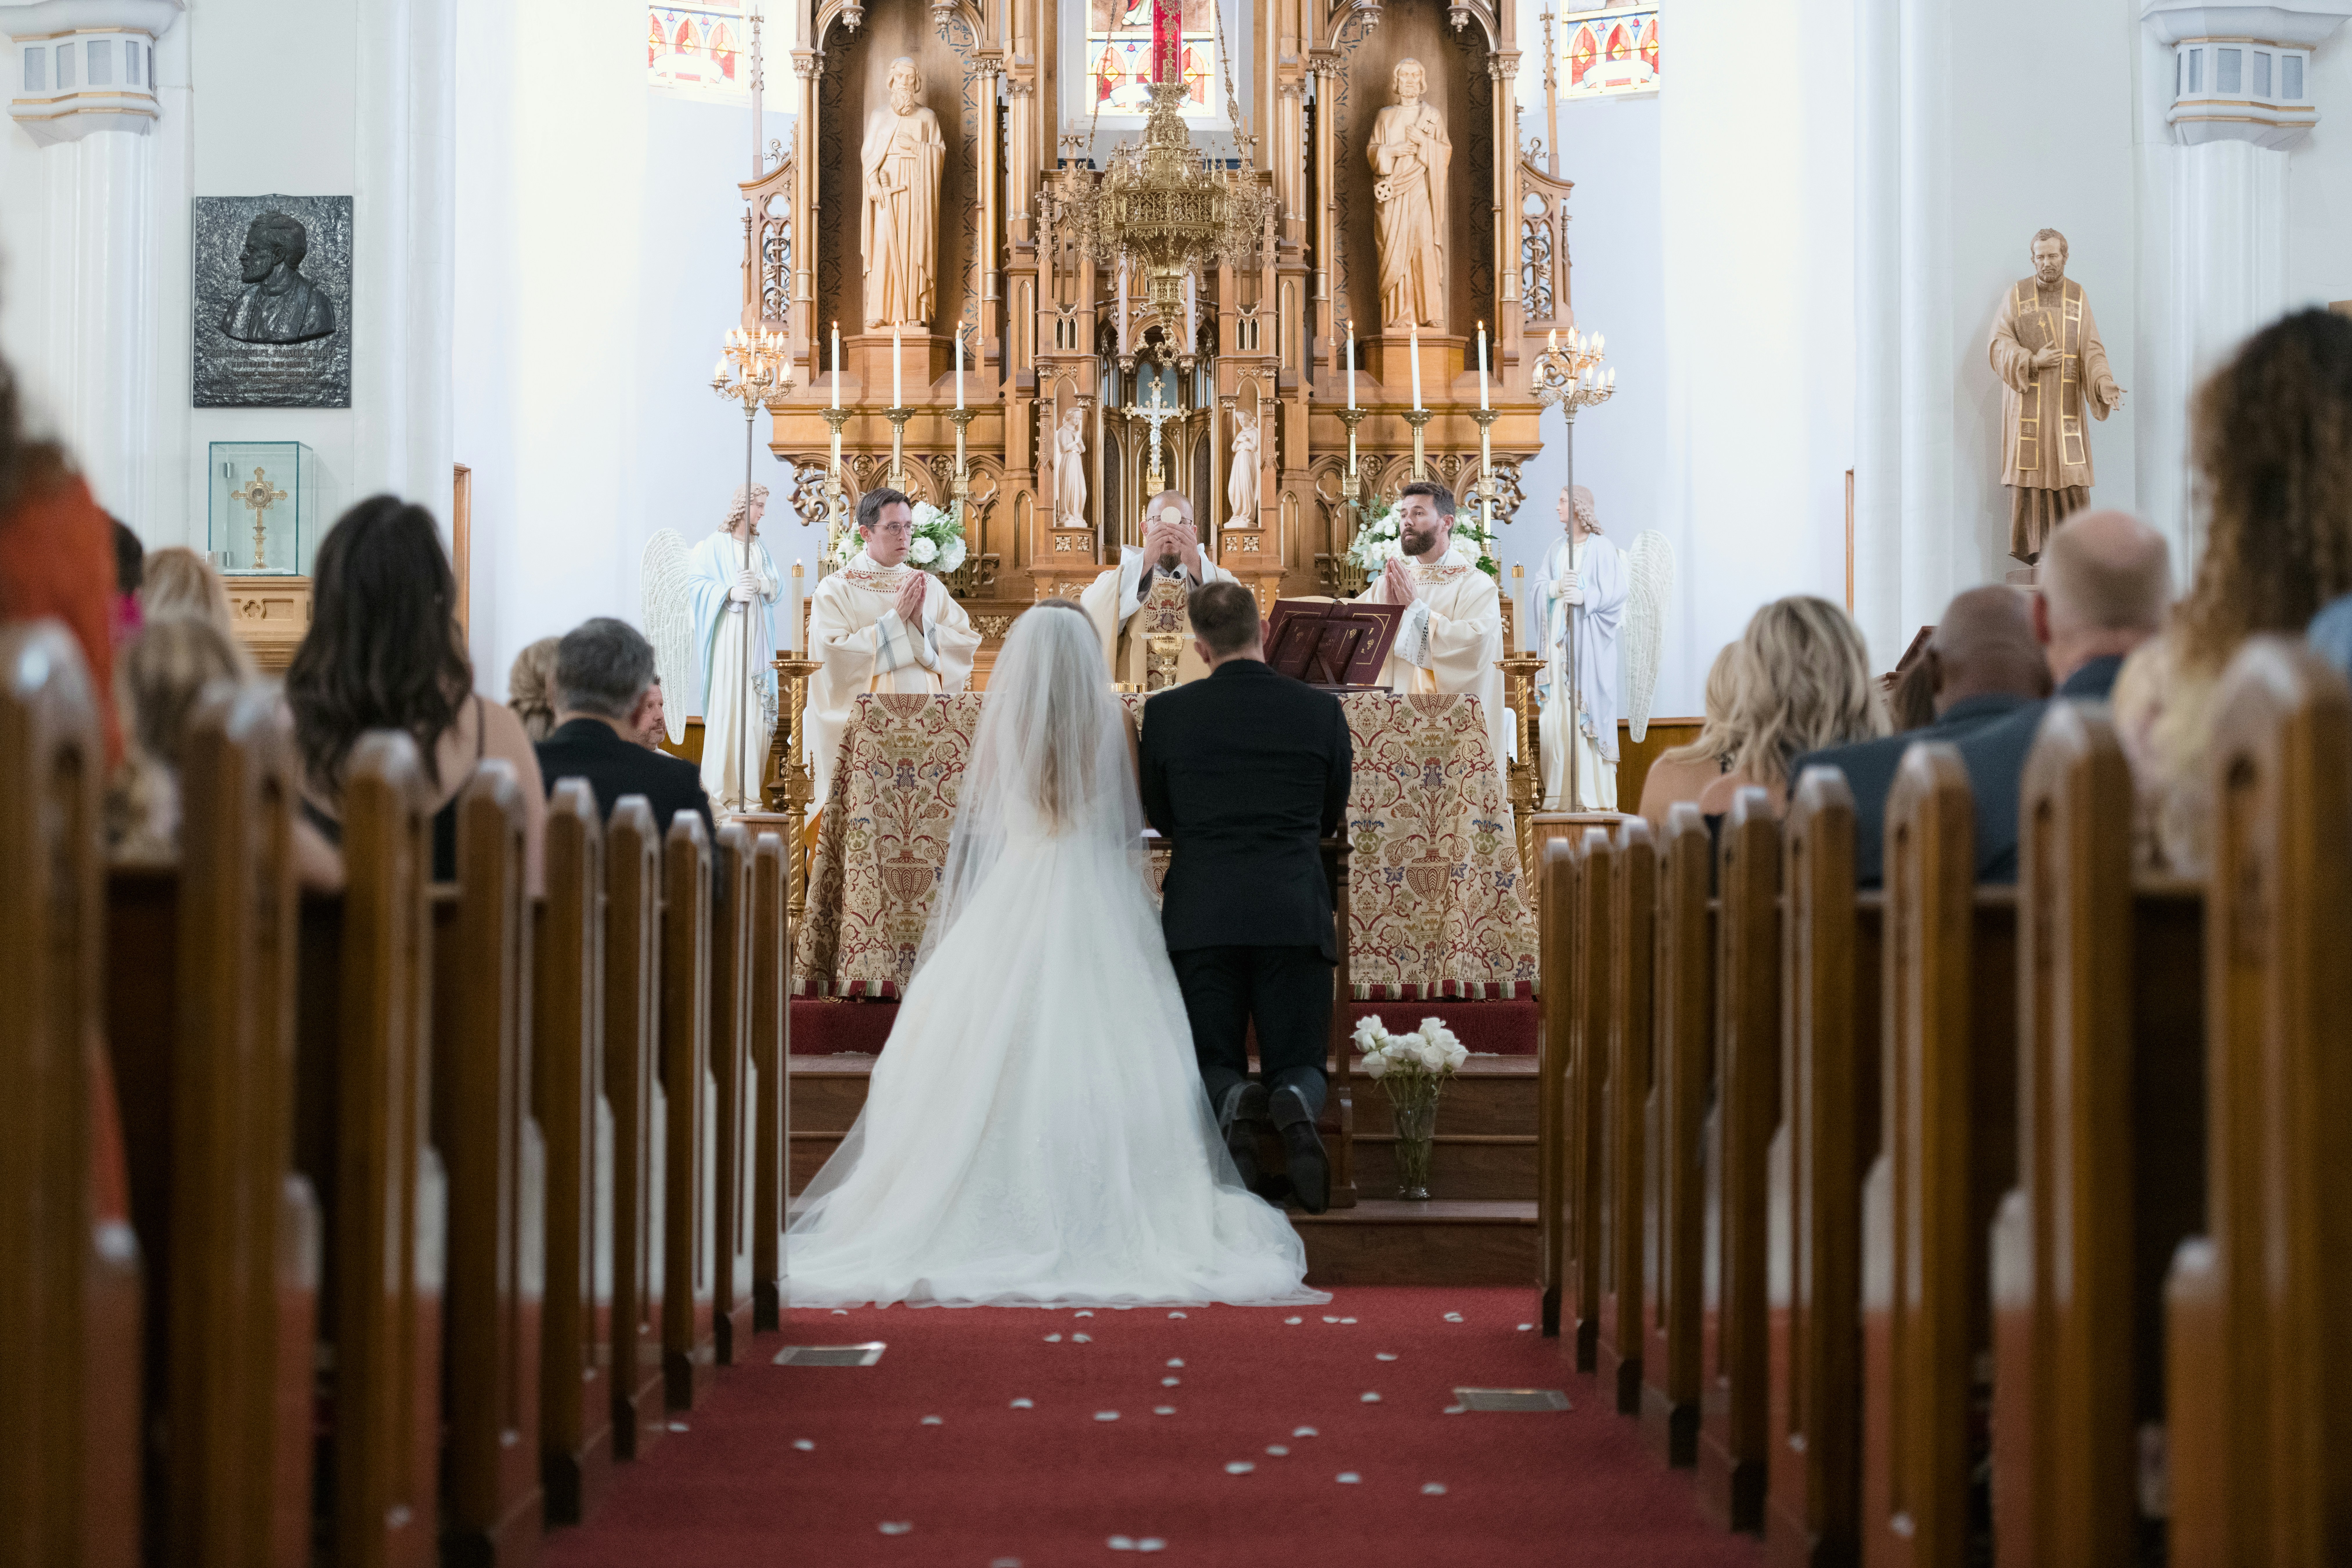 Groom and bride at church | Source: Unsplash